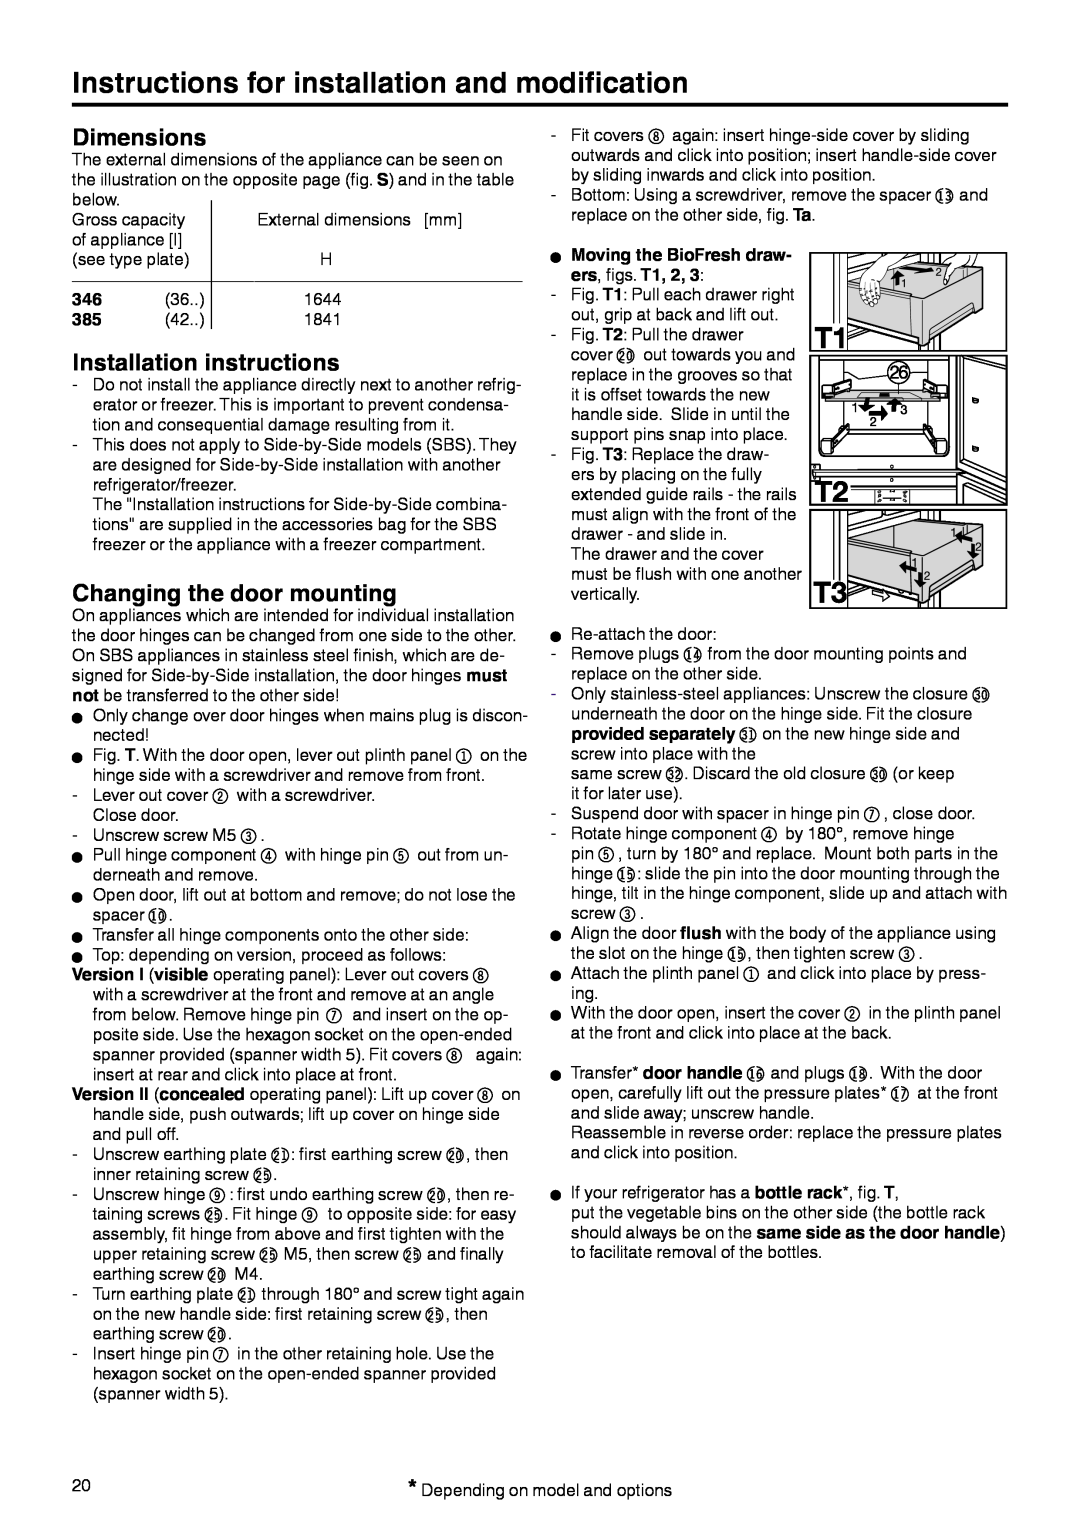 Liebherr 7082 212-02 manual Instructions for installation and modification, Dimensions, Installation instructions 